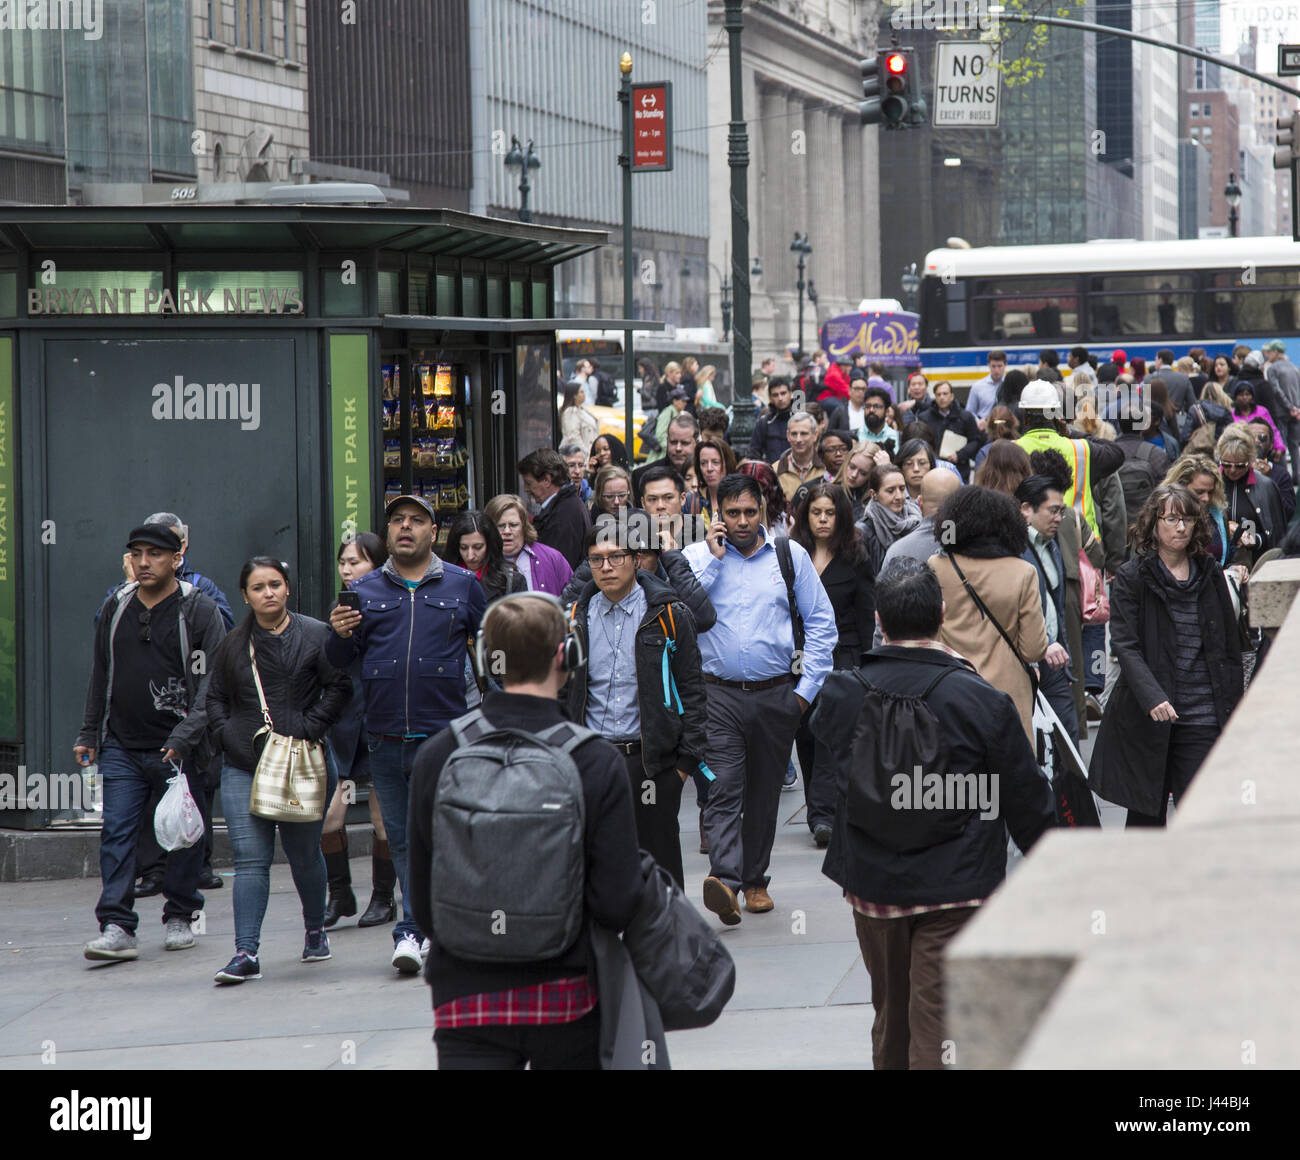 The sidewalk is always crowded on 42nd Street along the New York Public Library between 5th and 6th Avenues in NYC. Stock Photo